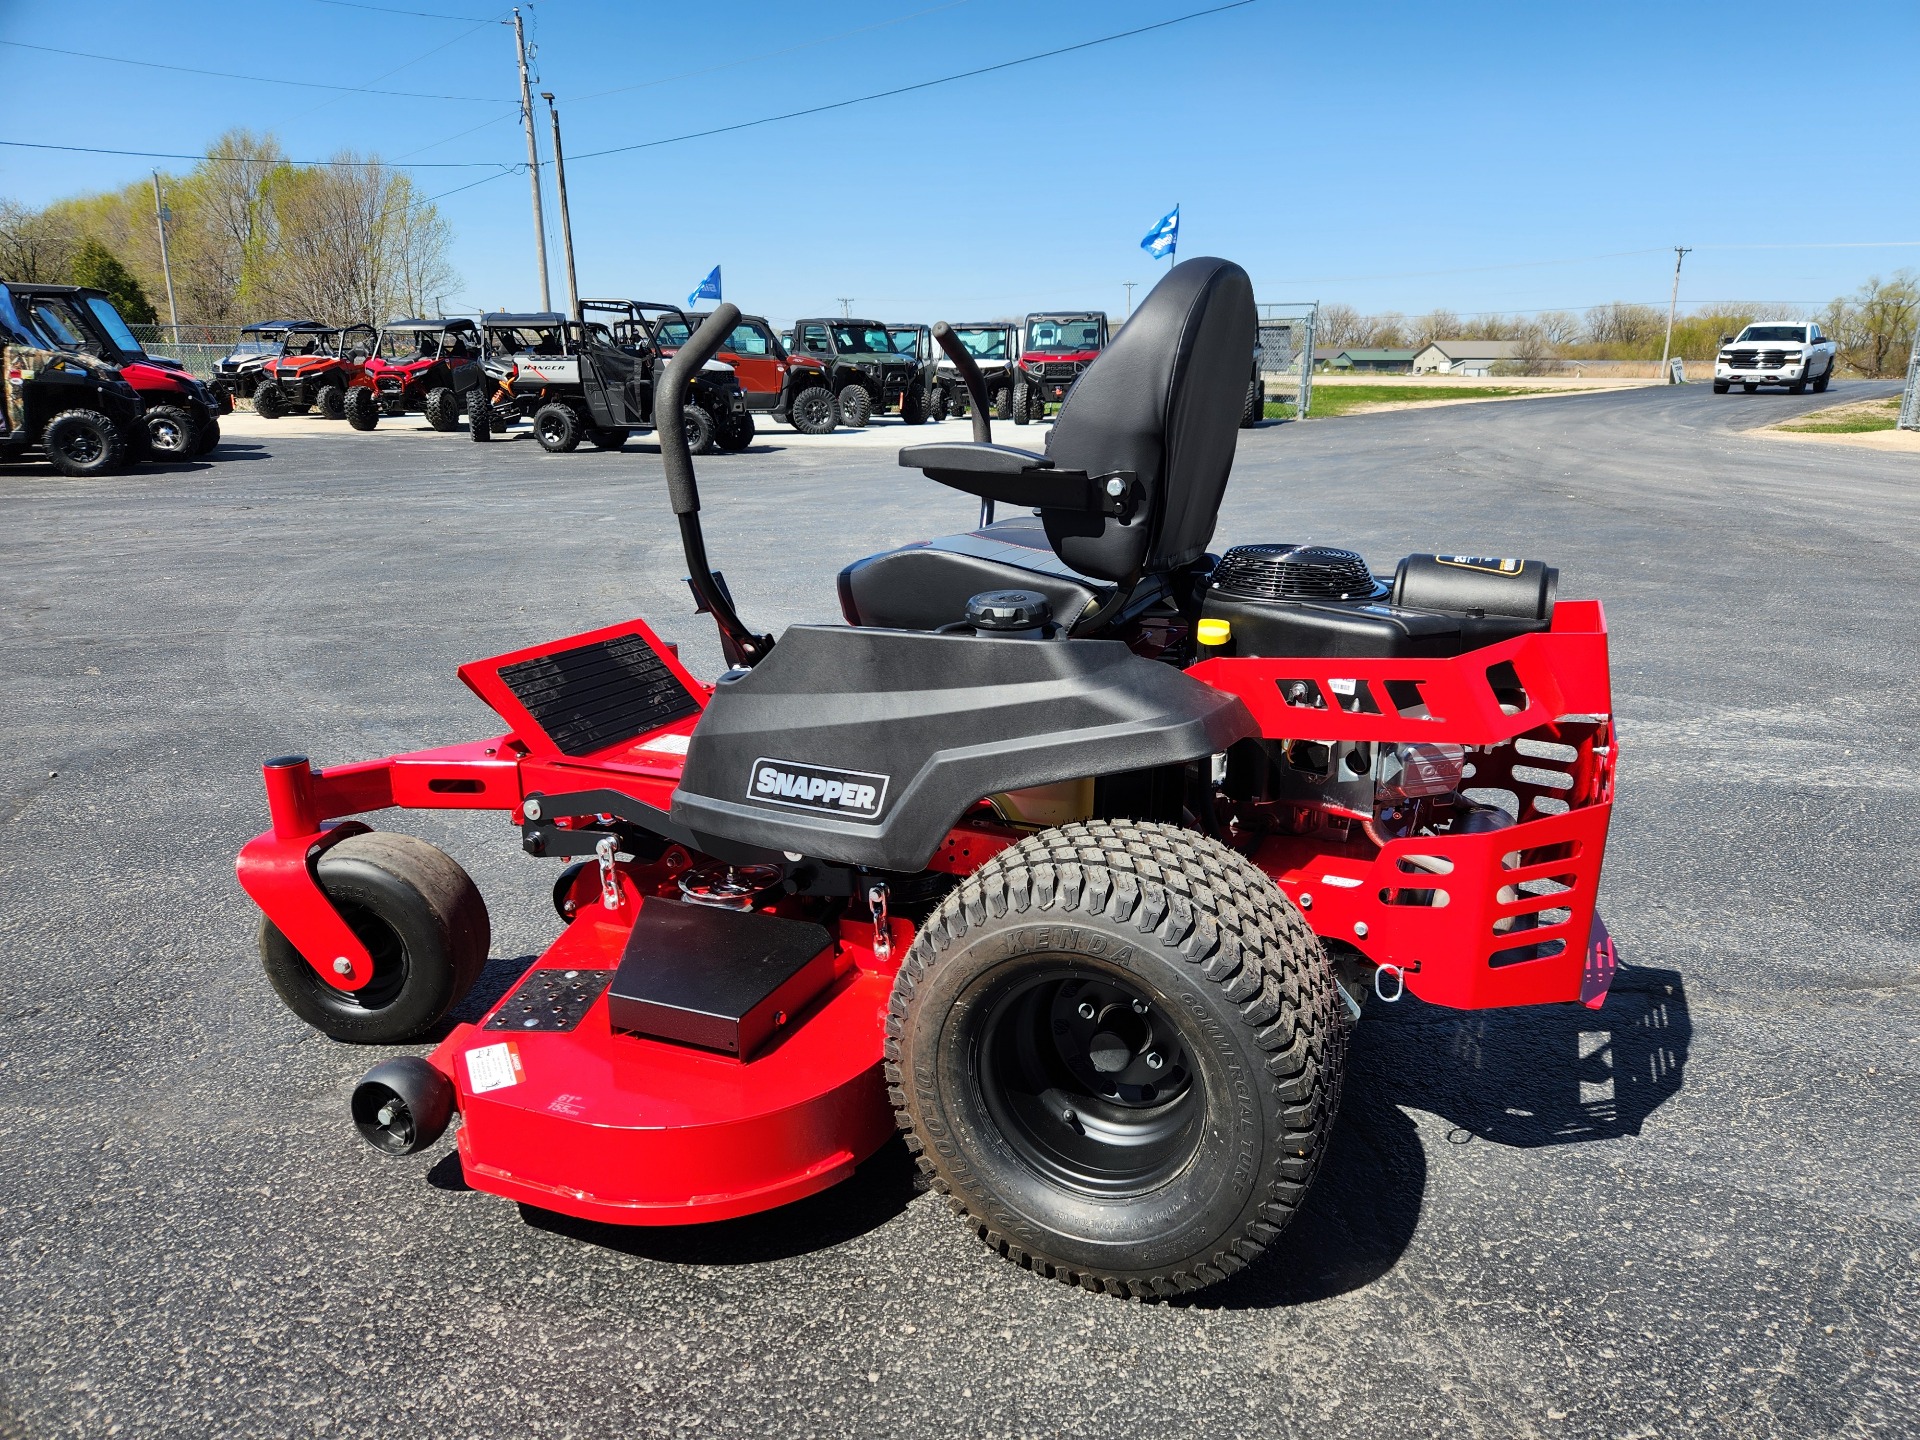 2022 Snapper 360Z XT 61 in. Briggs & Stratton Commercial Series 25 hp in Fond Du Lac, Wisconsin - Photo 3